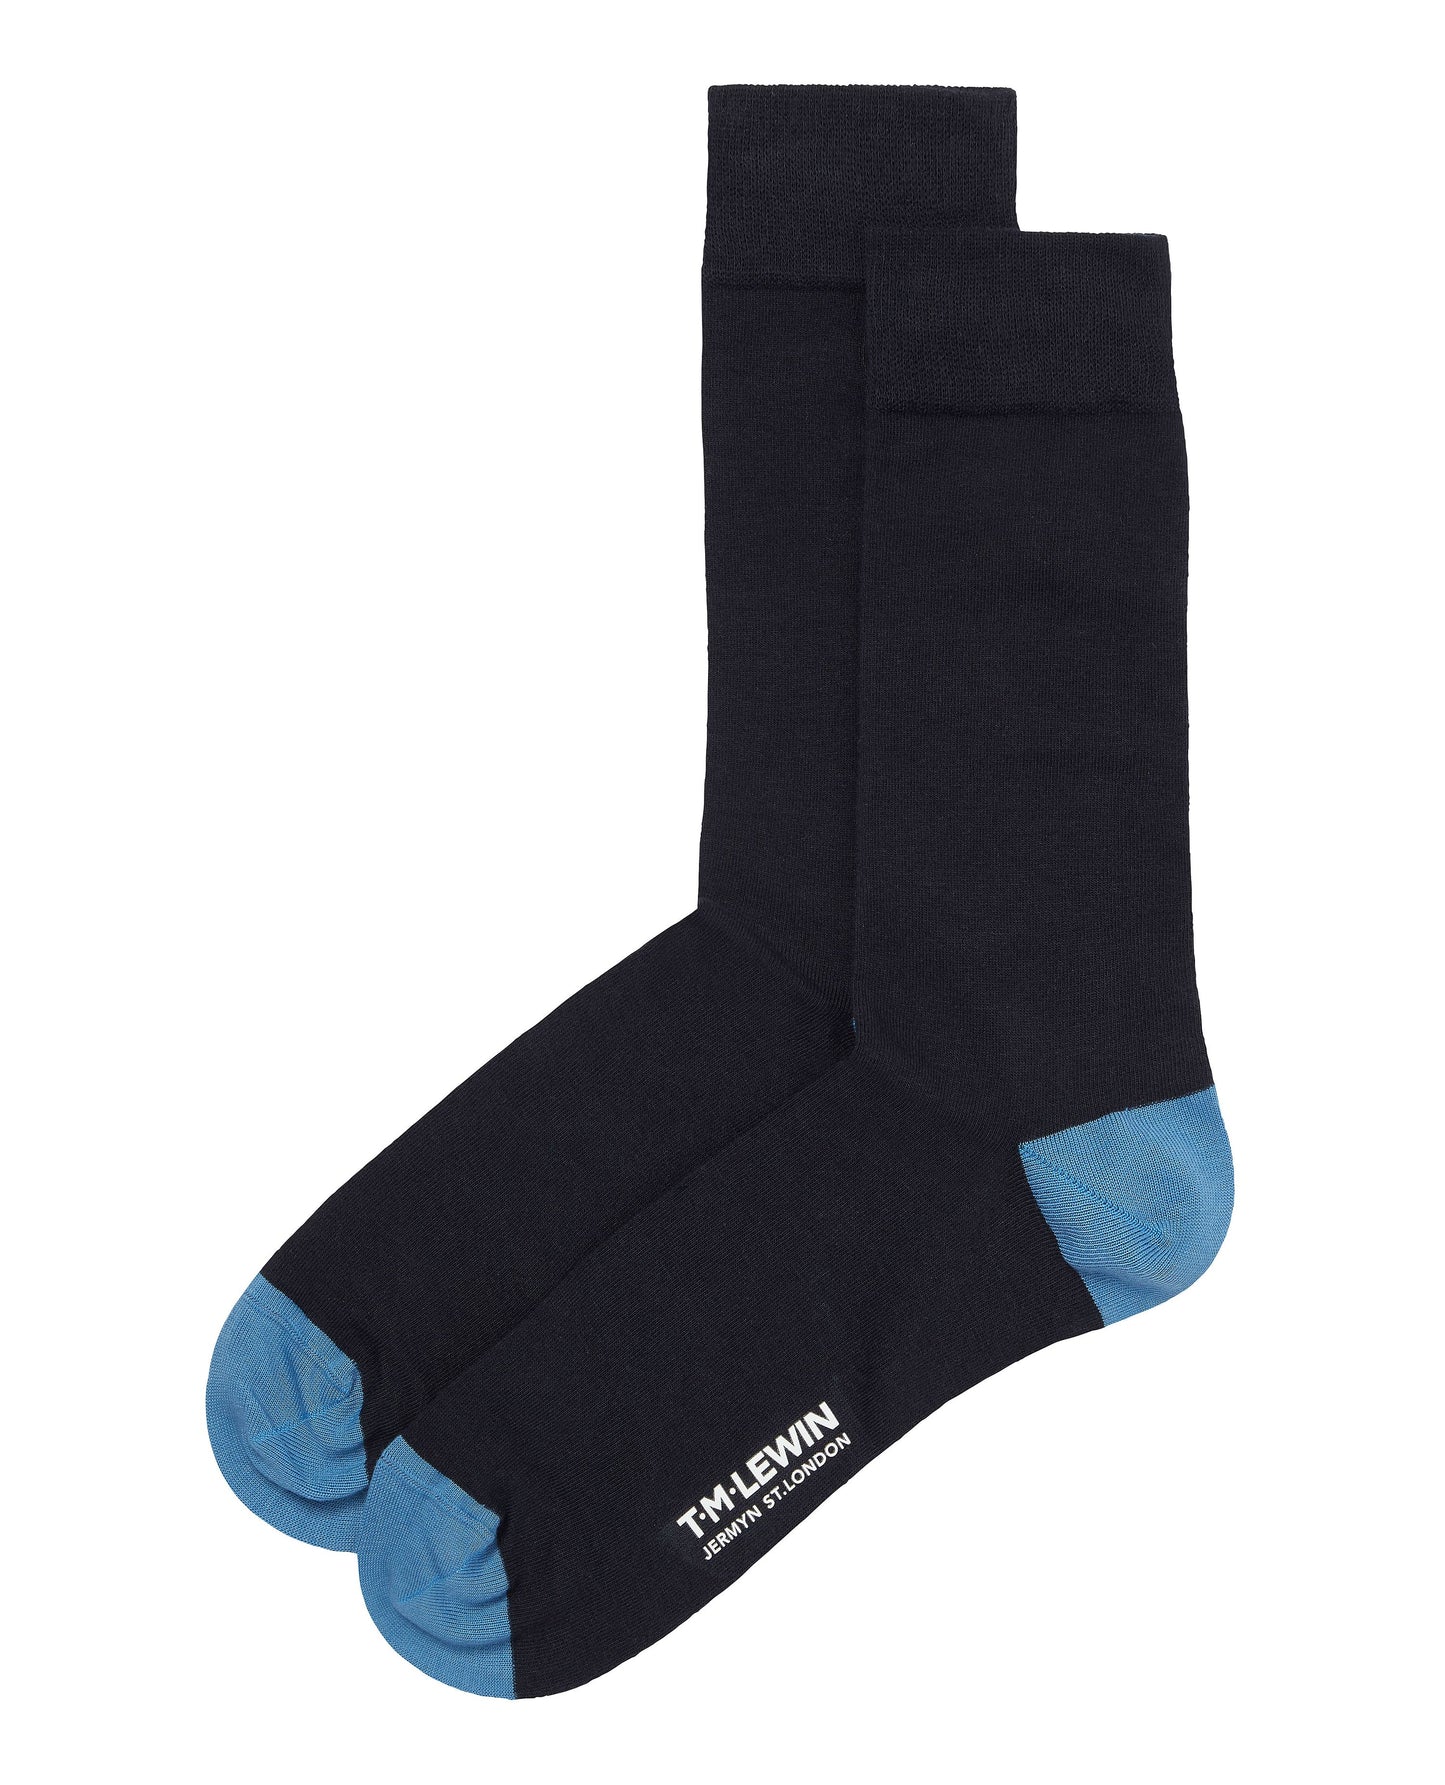 Image 3 of Navy Contrast Heel and Toe 5 Pack Sock Set